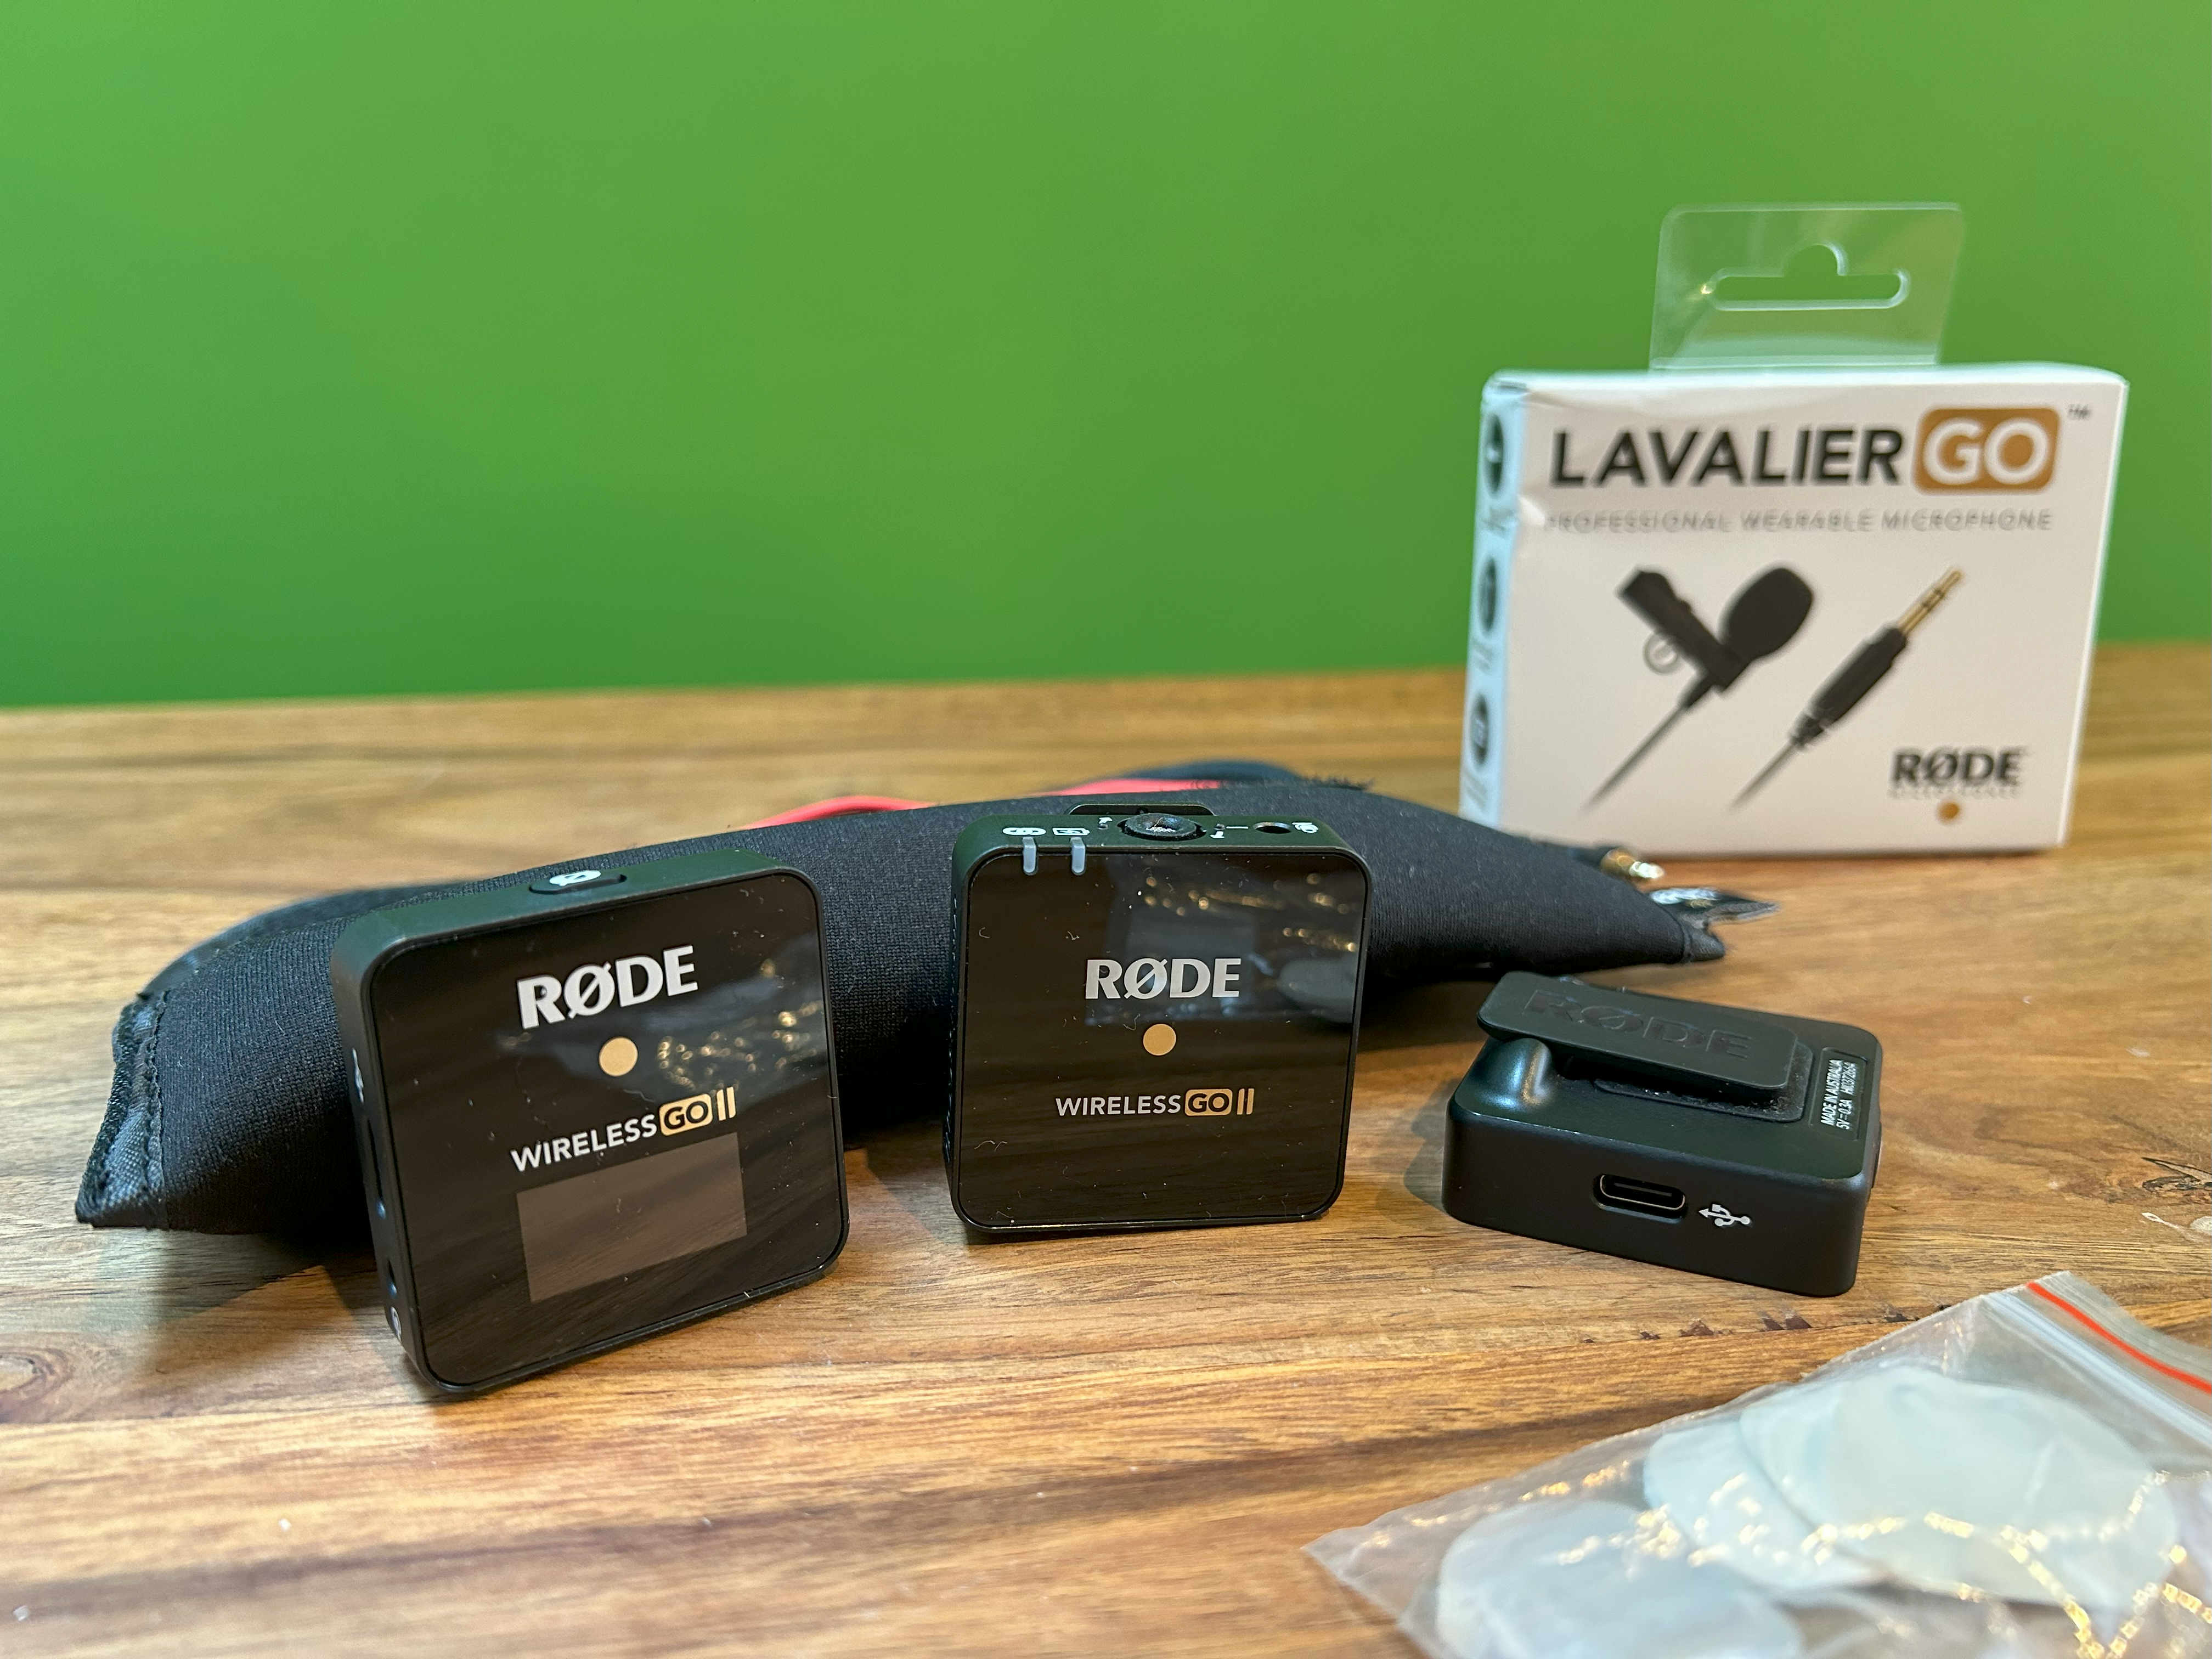 A Rode Wireless Go II kit, with a Lavalier Go in the background